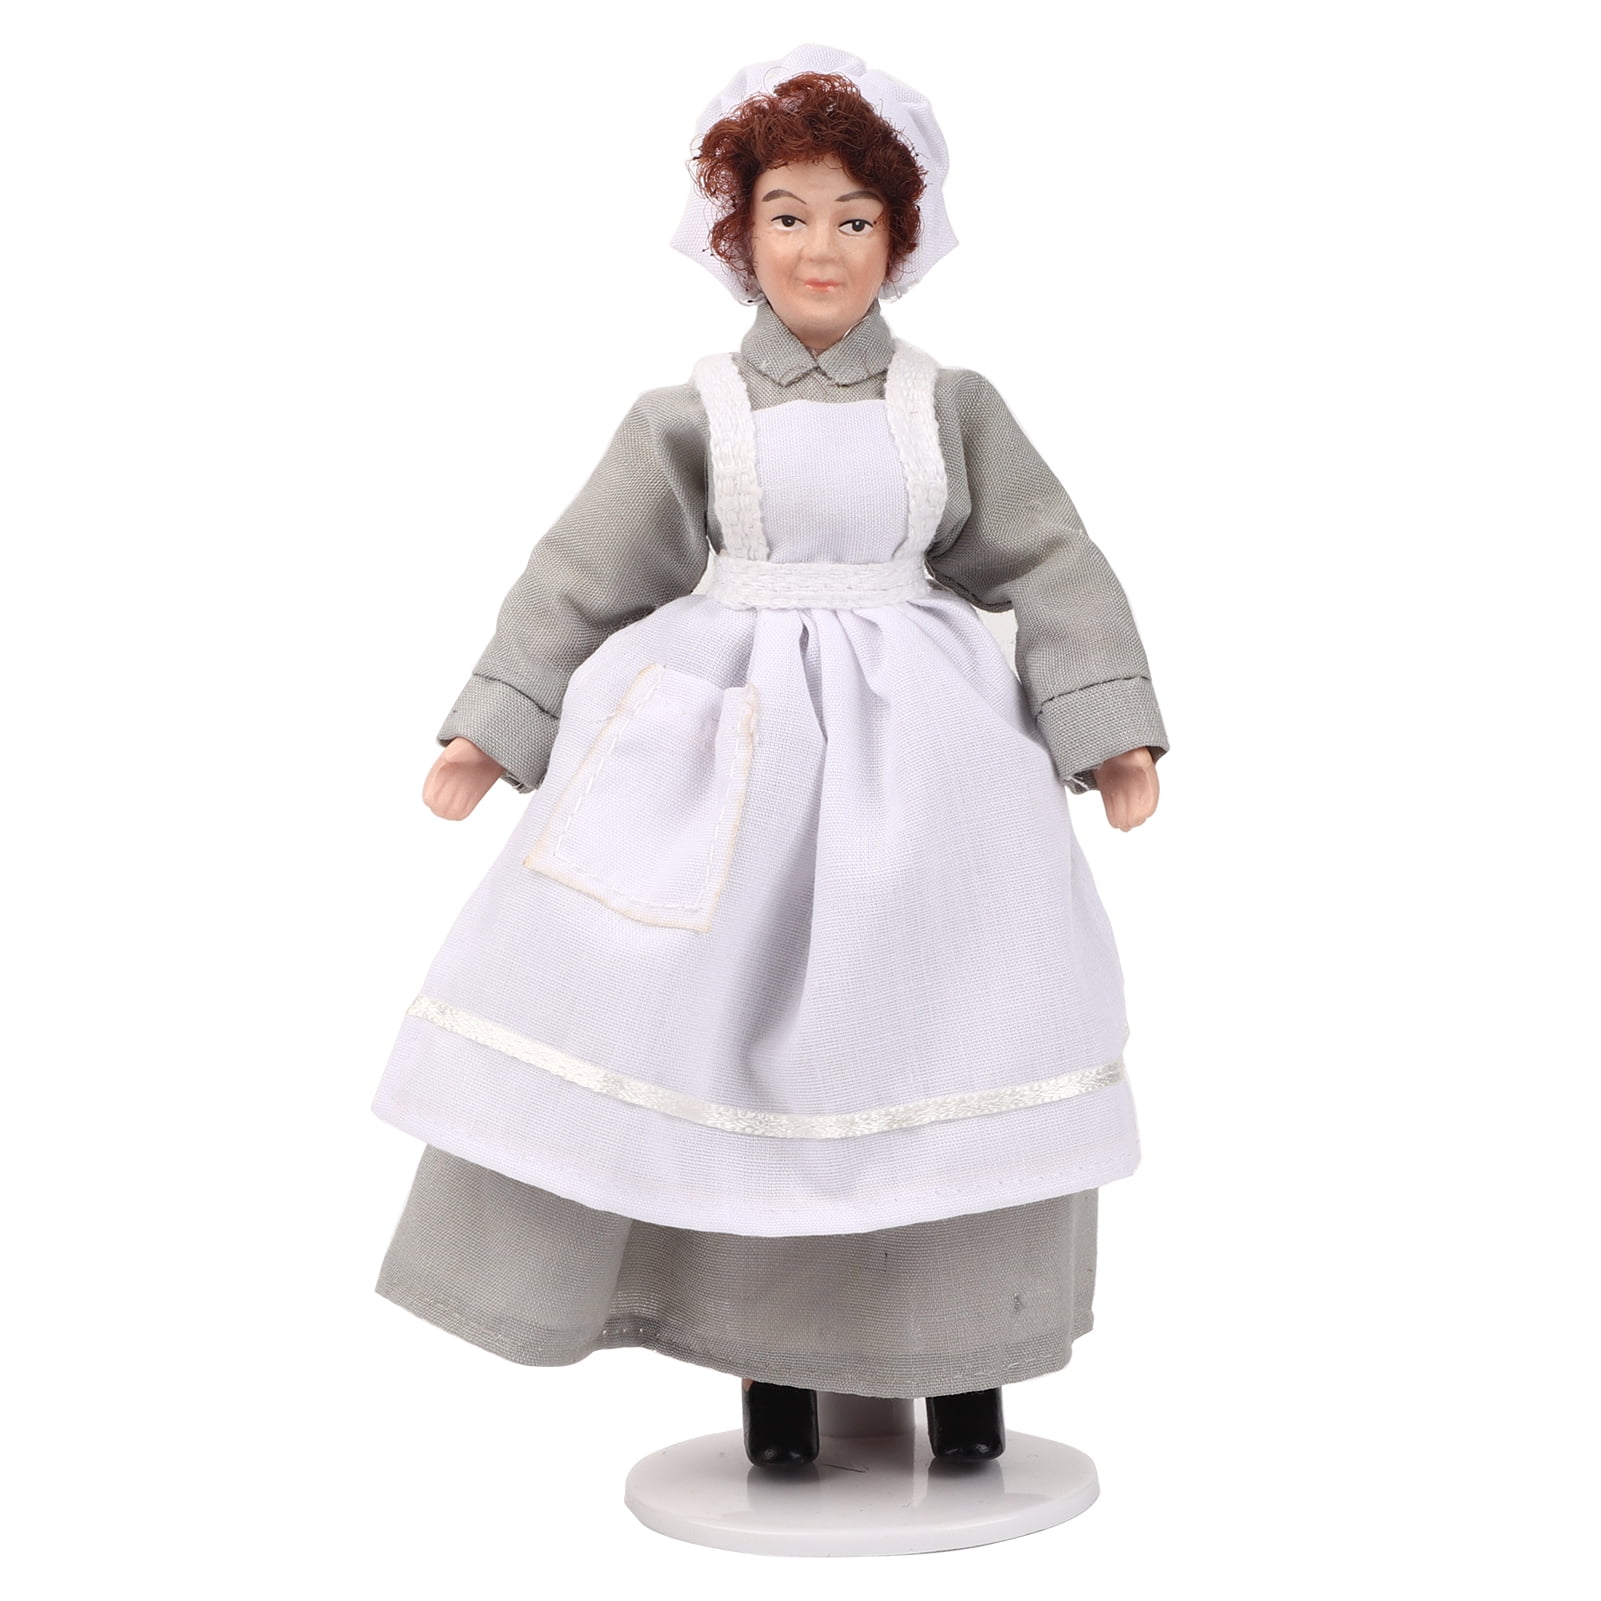 MAID DOLLS HOUSE MAID/ SERVANT PORCELAIN DOLL WITH STAND 12TH SCALE .QUALITY 